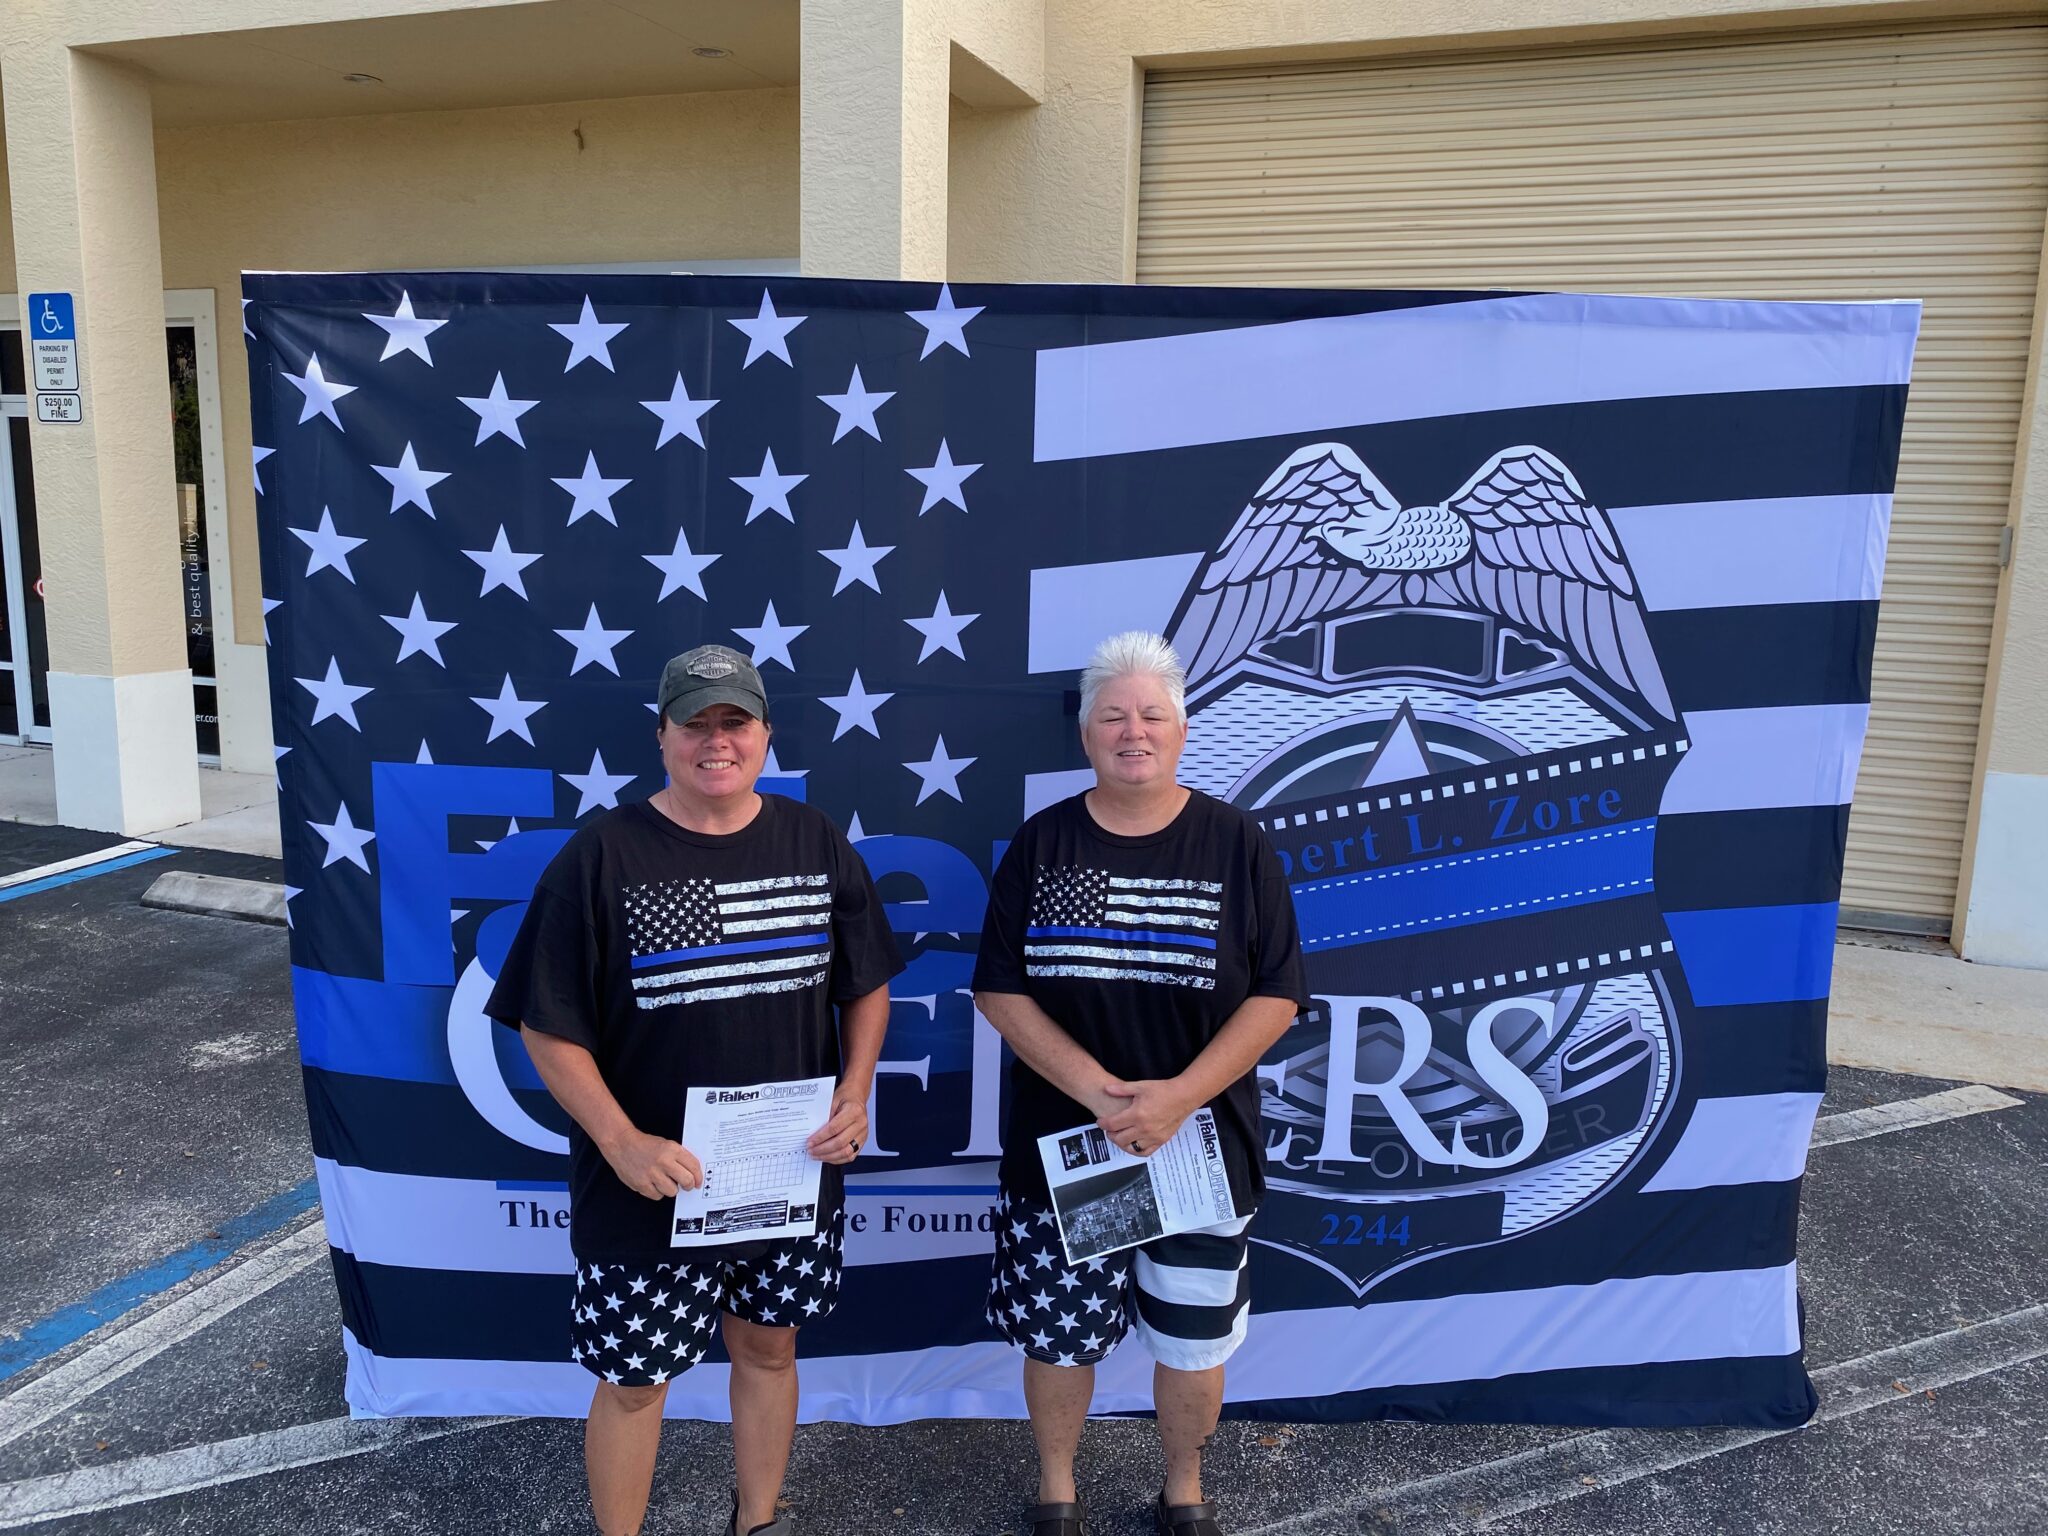 Riding with the Blue: Charity Poker Run